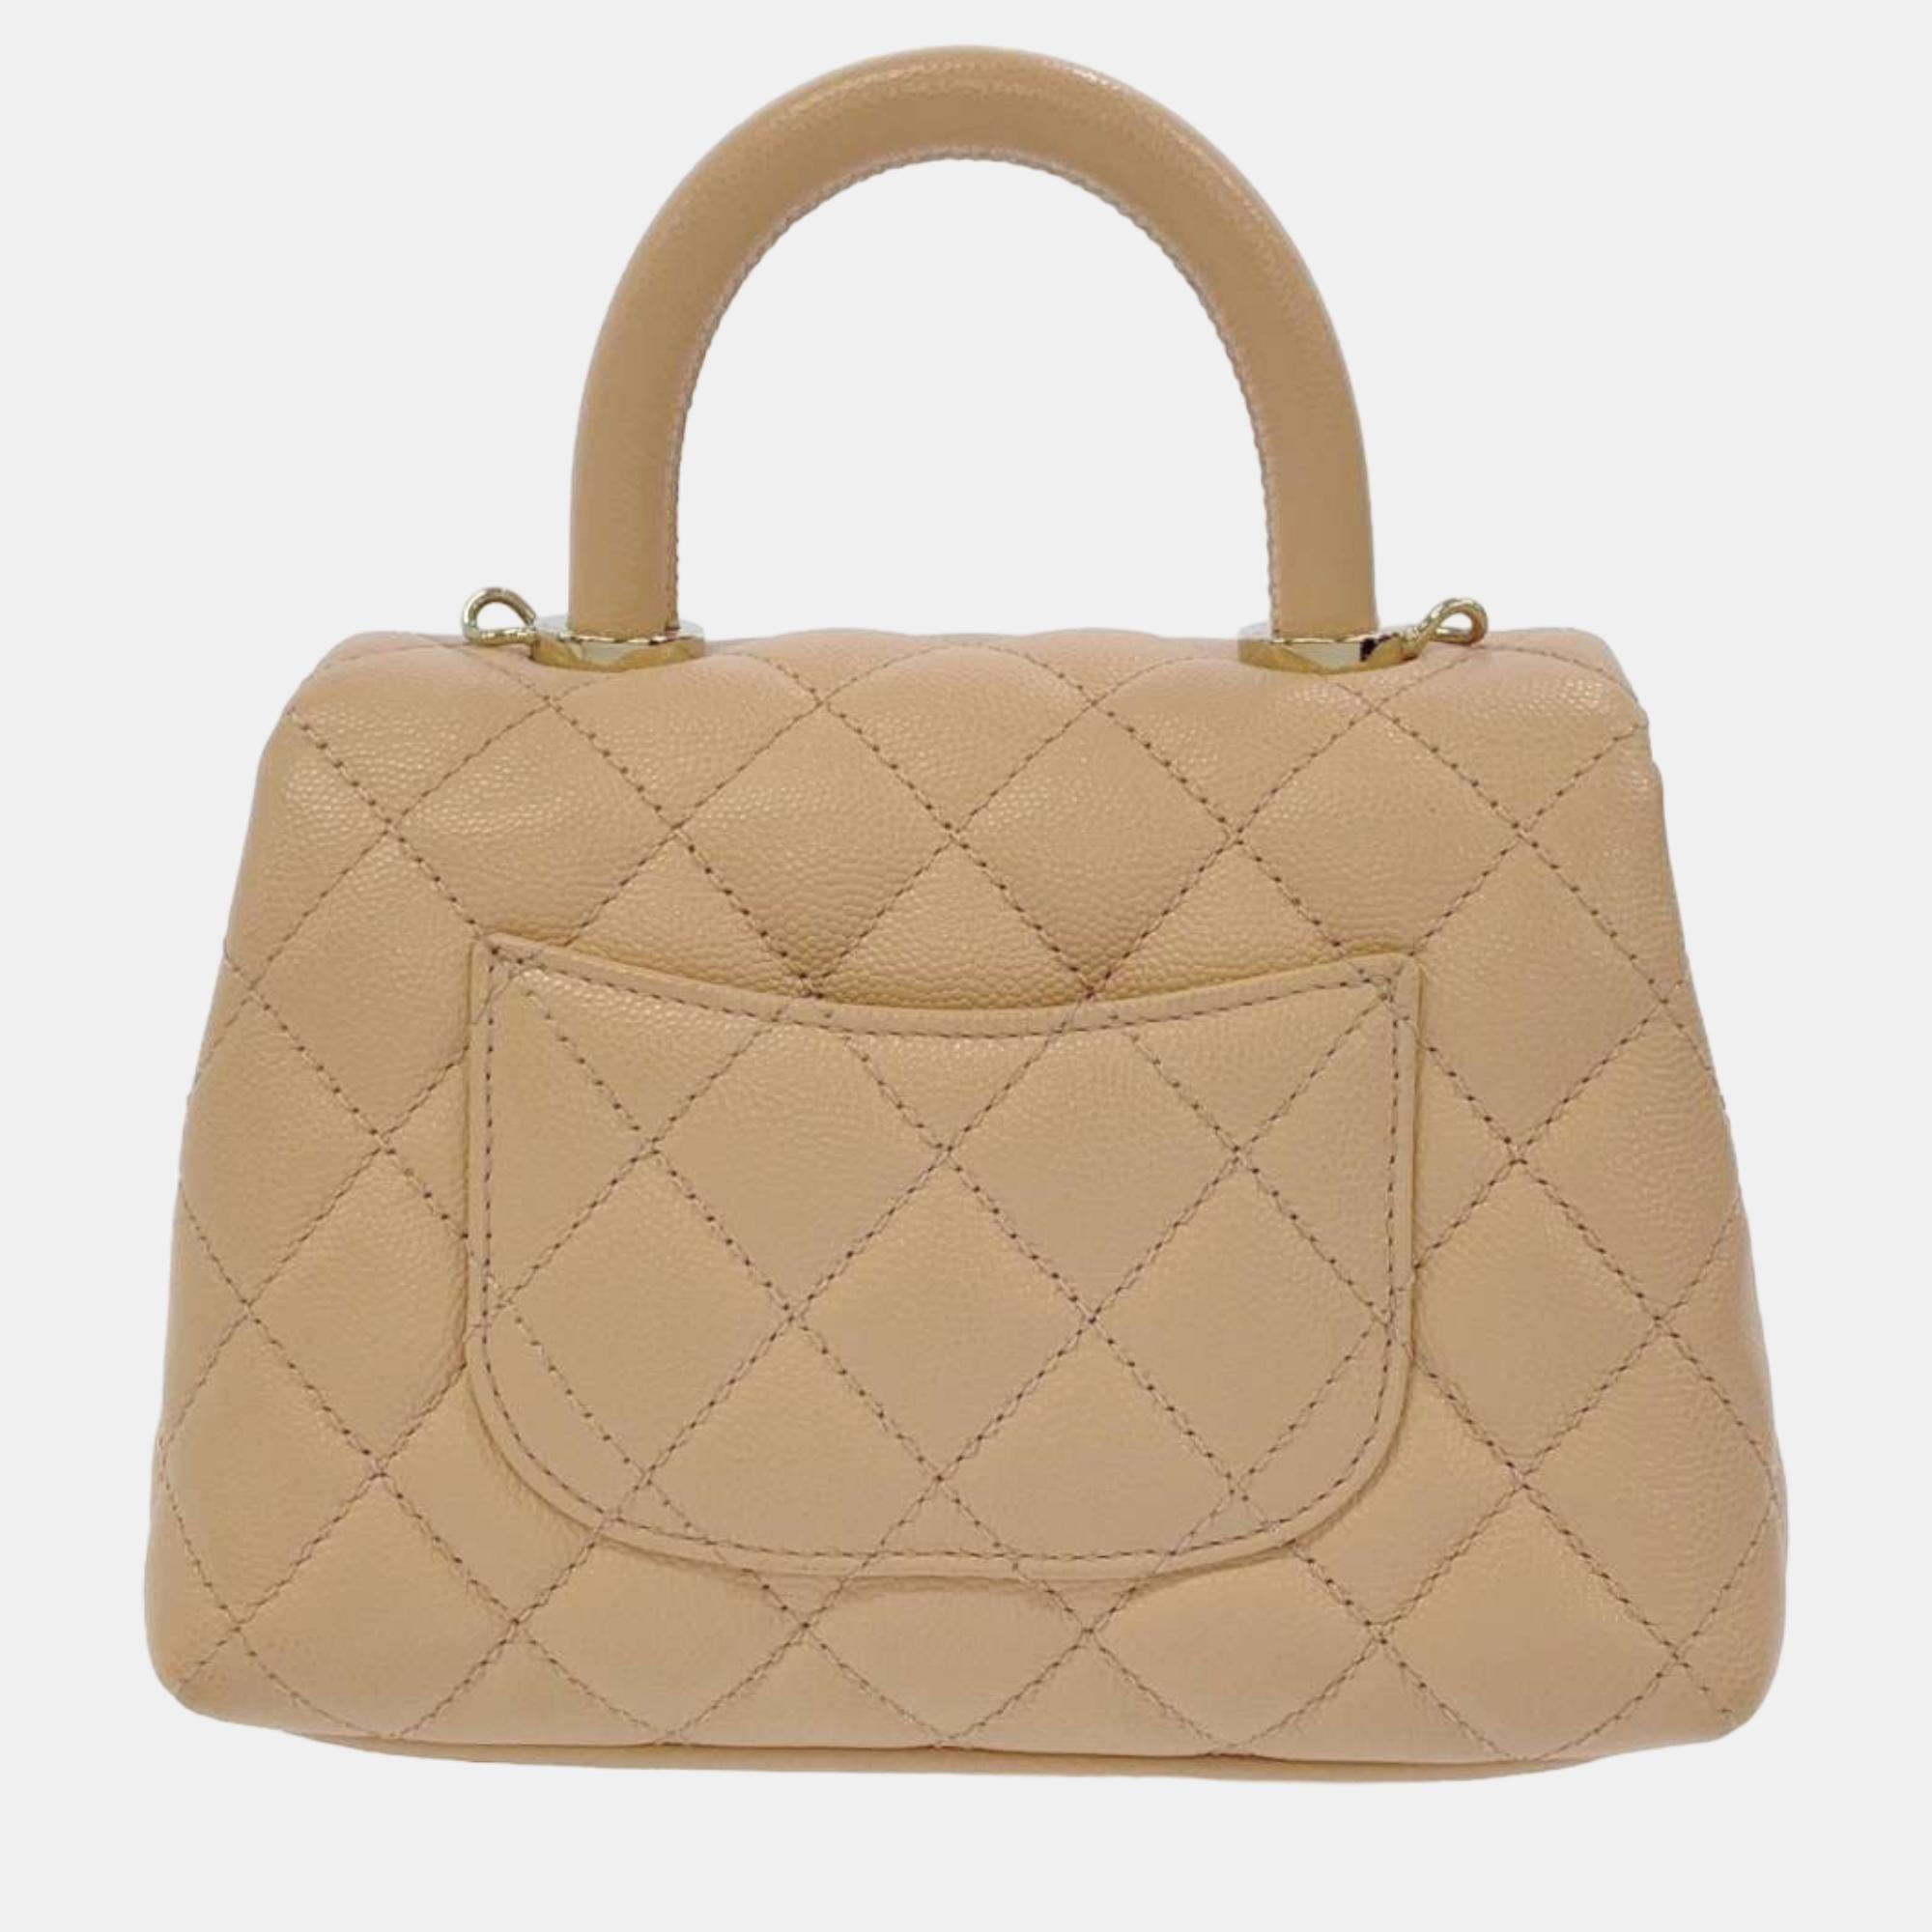 Chanel Beige Caviar Leather Coco Top Handle Bag